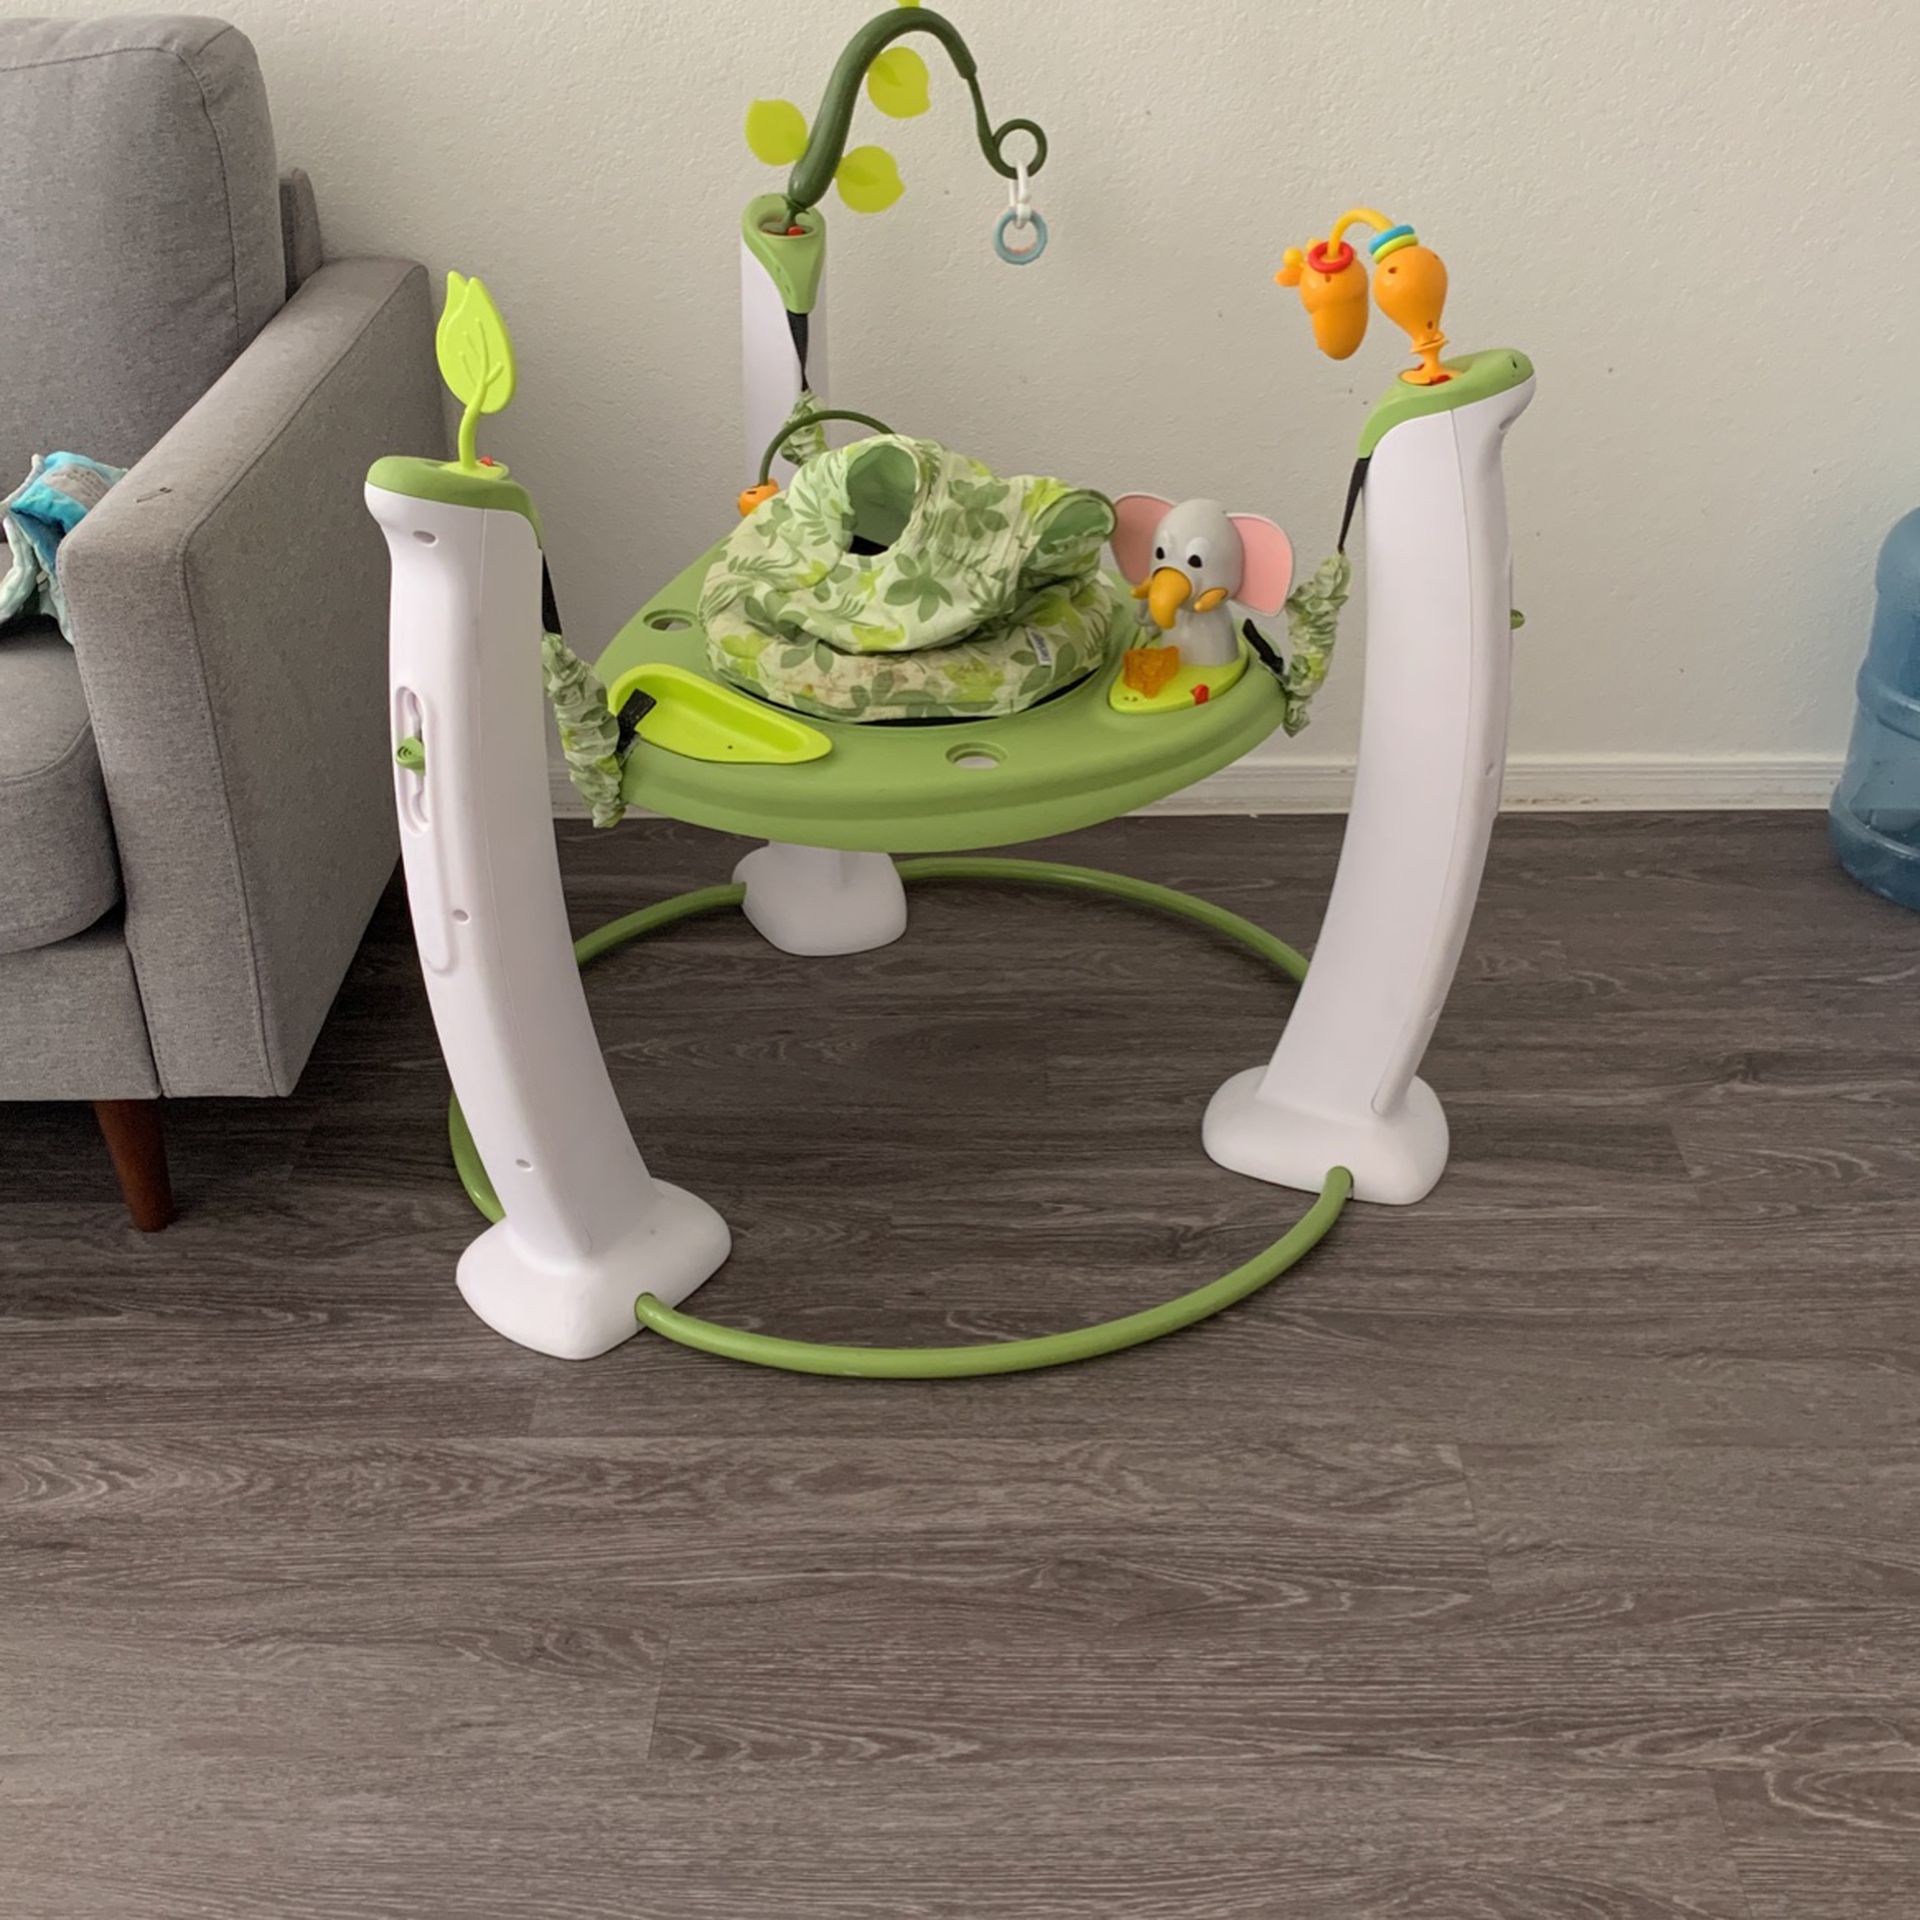 Evenflo ExerSaucer Jump & Learn Stationary Jumper - Jungle Quest